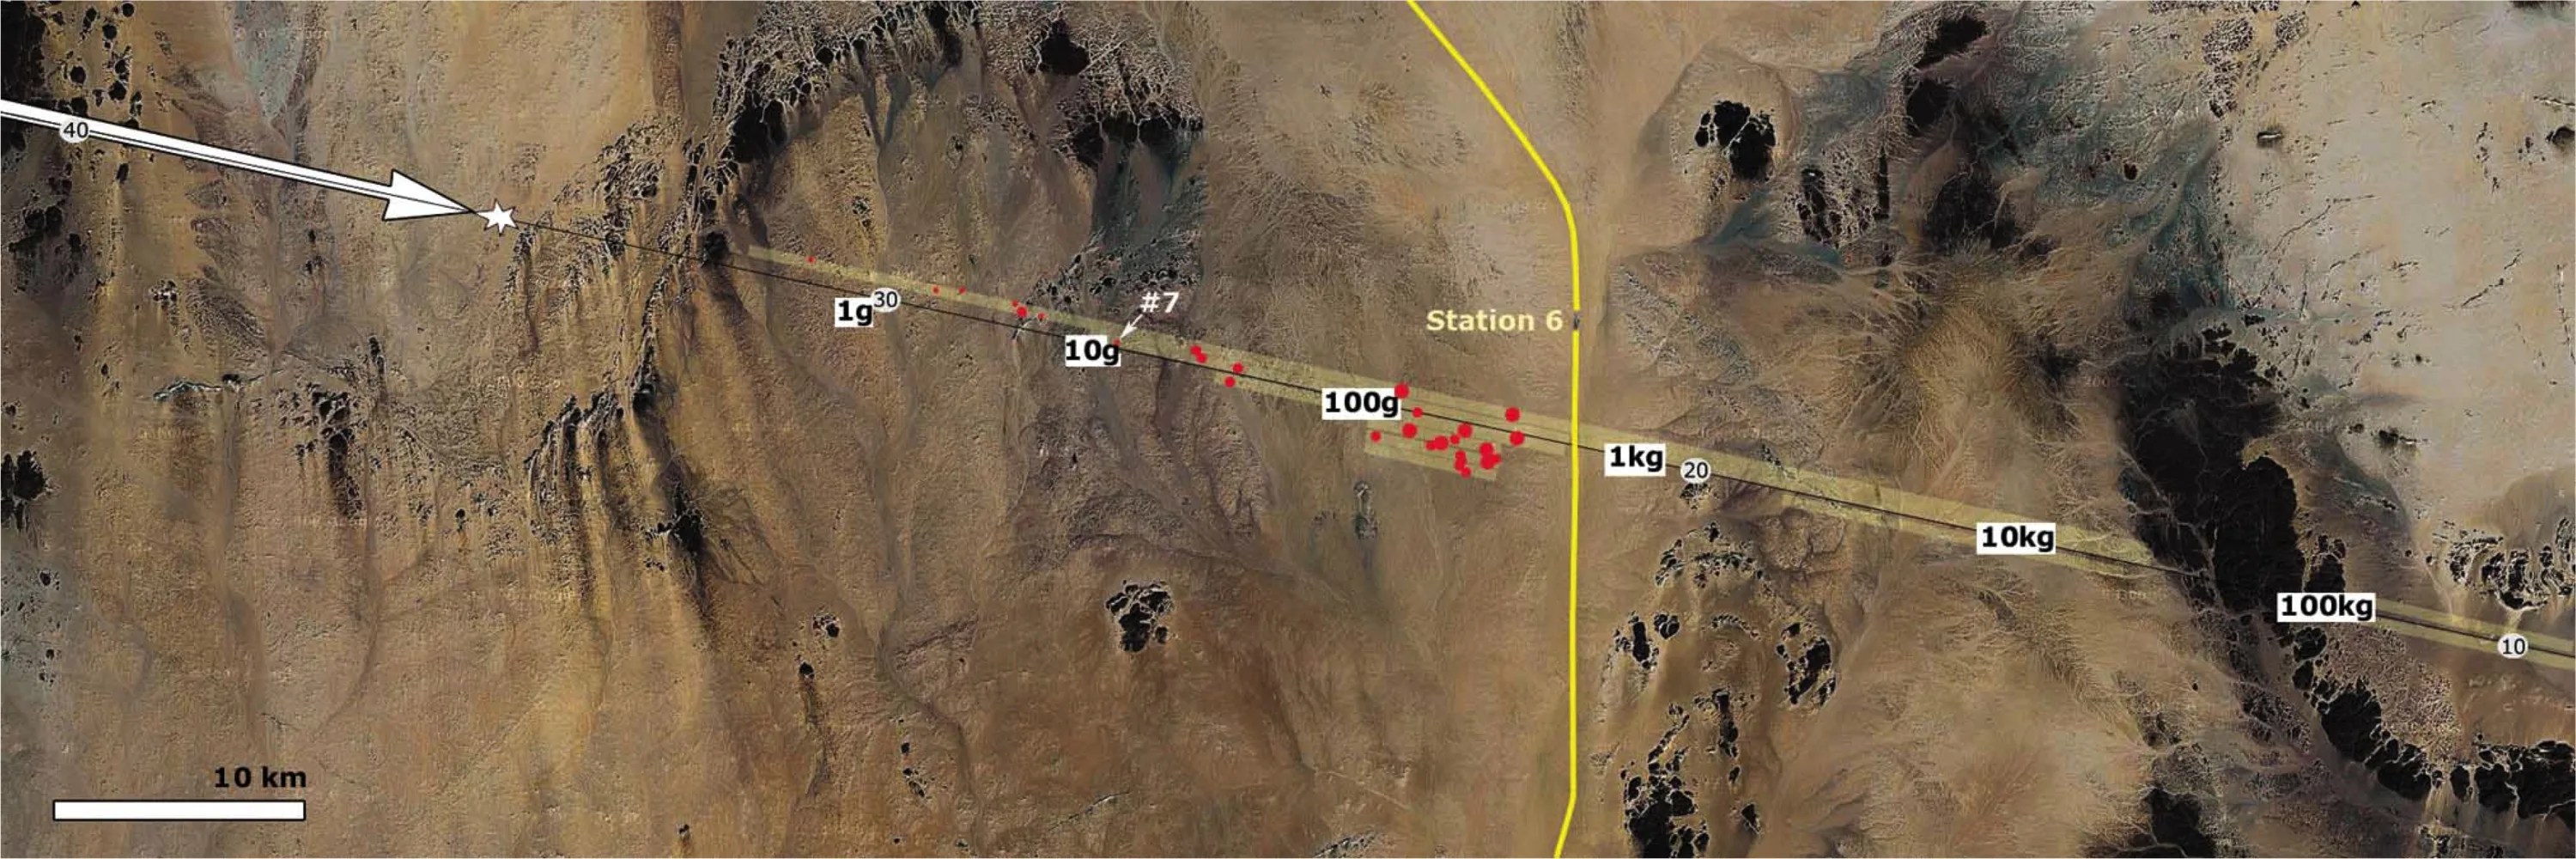 Graphic showing trajectory of meteor over desert.